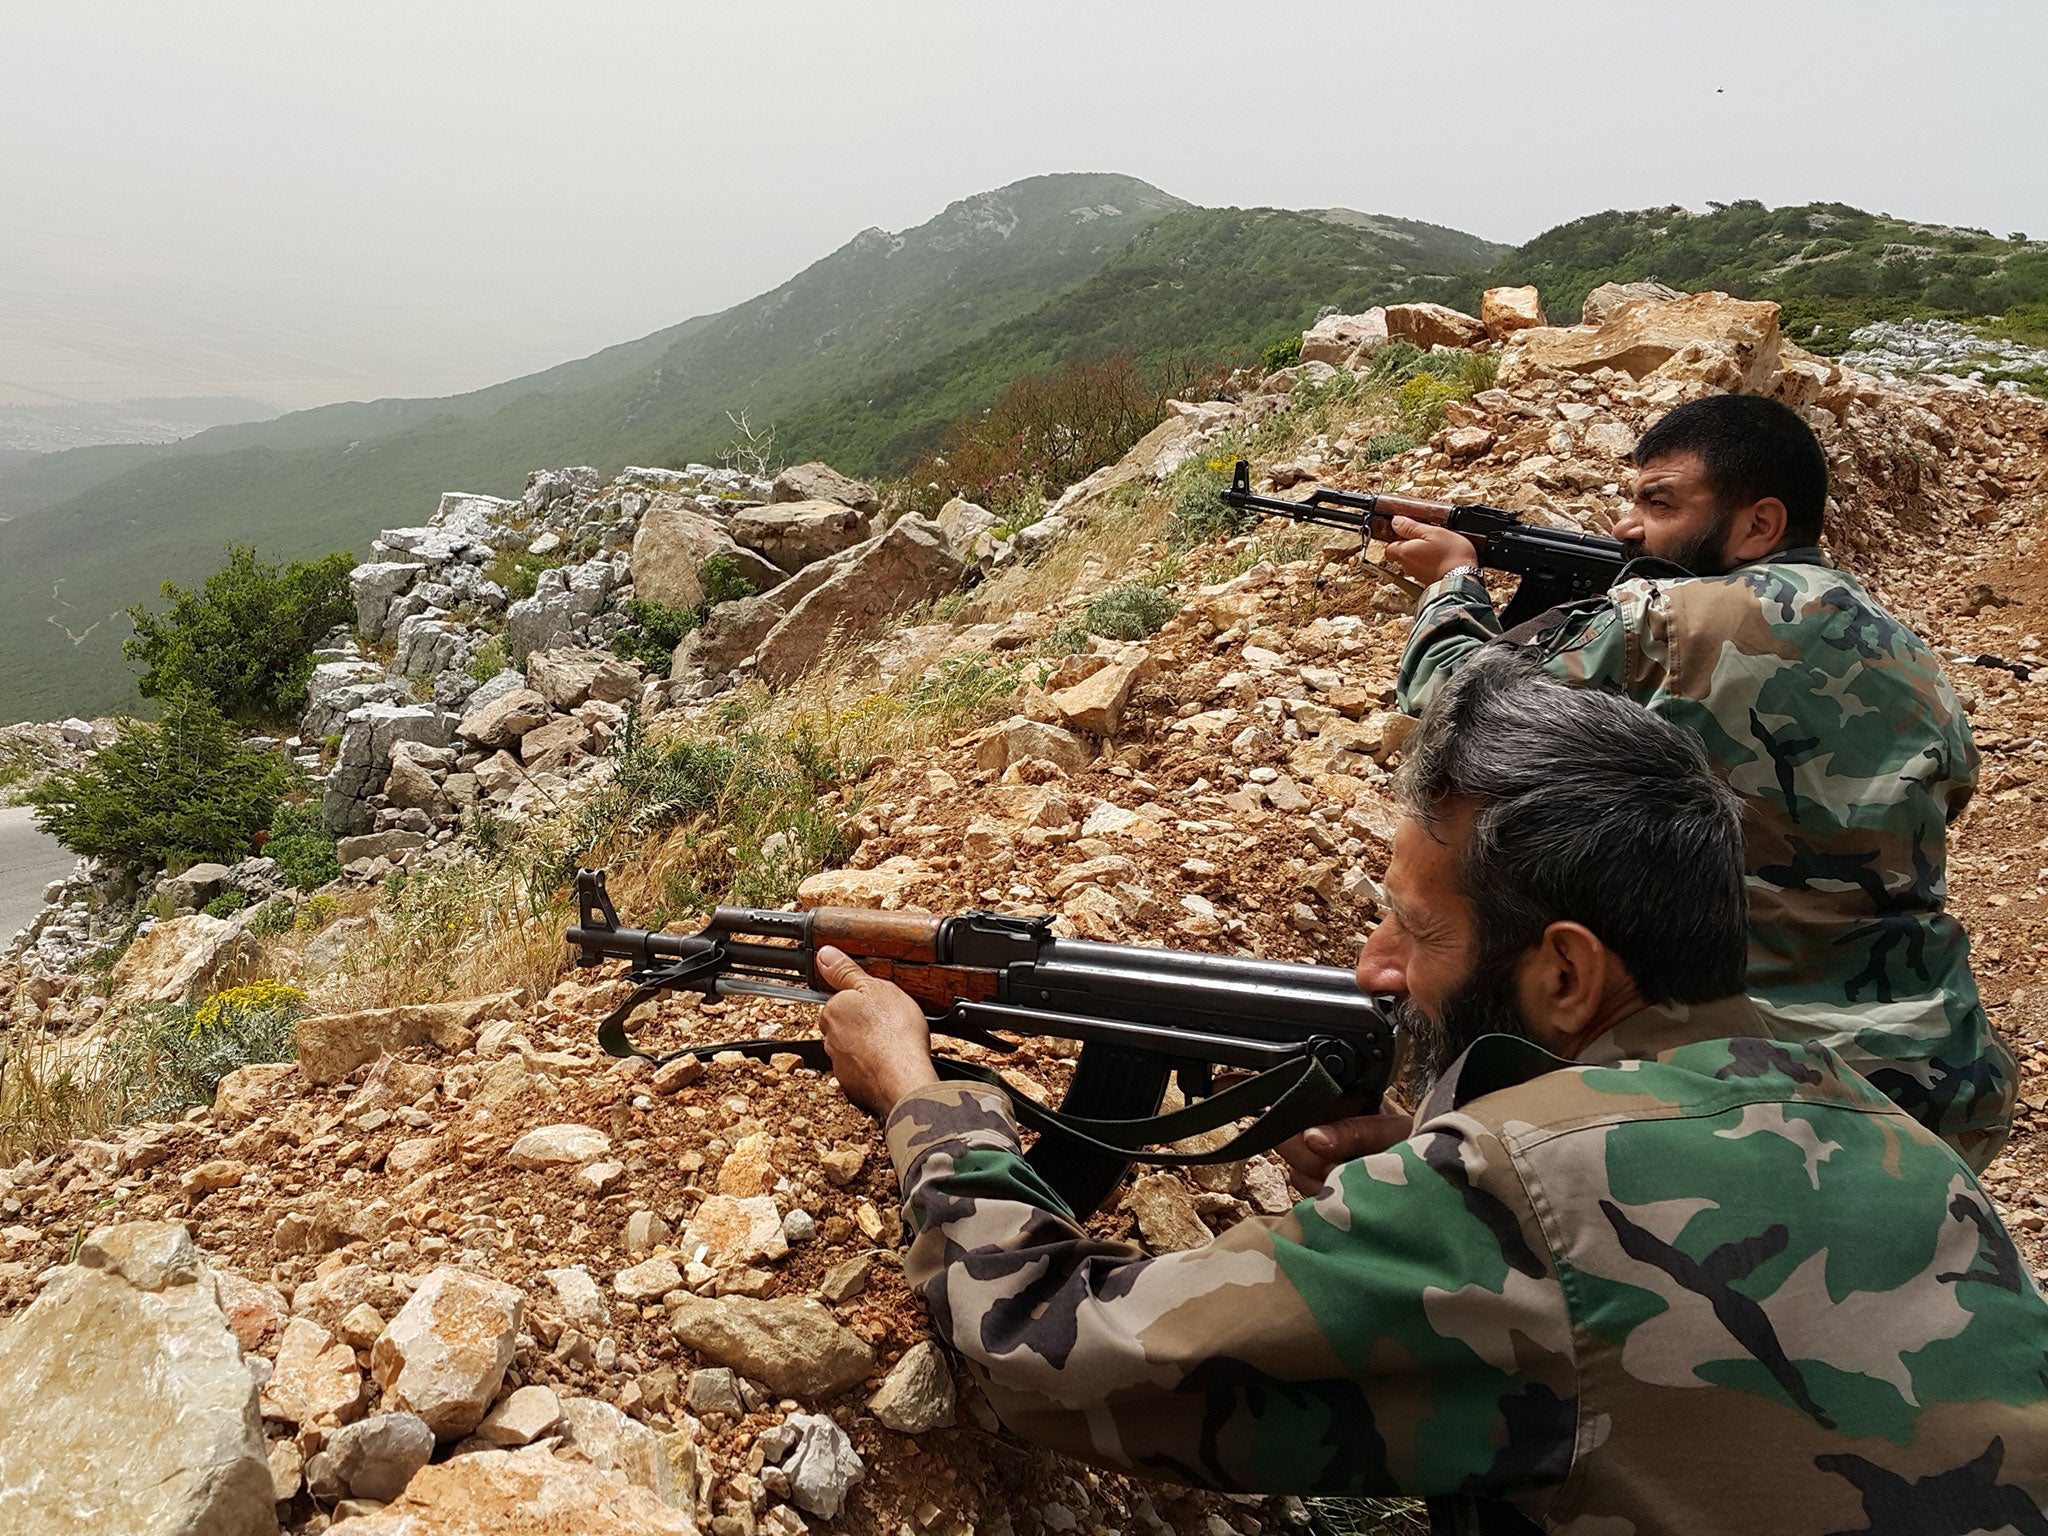 Syrian soldiers intend to hold on to territory in the Orontes river valley